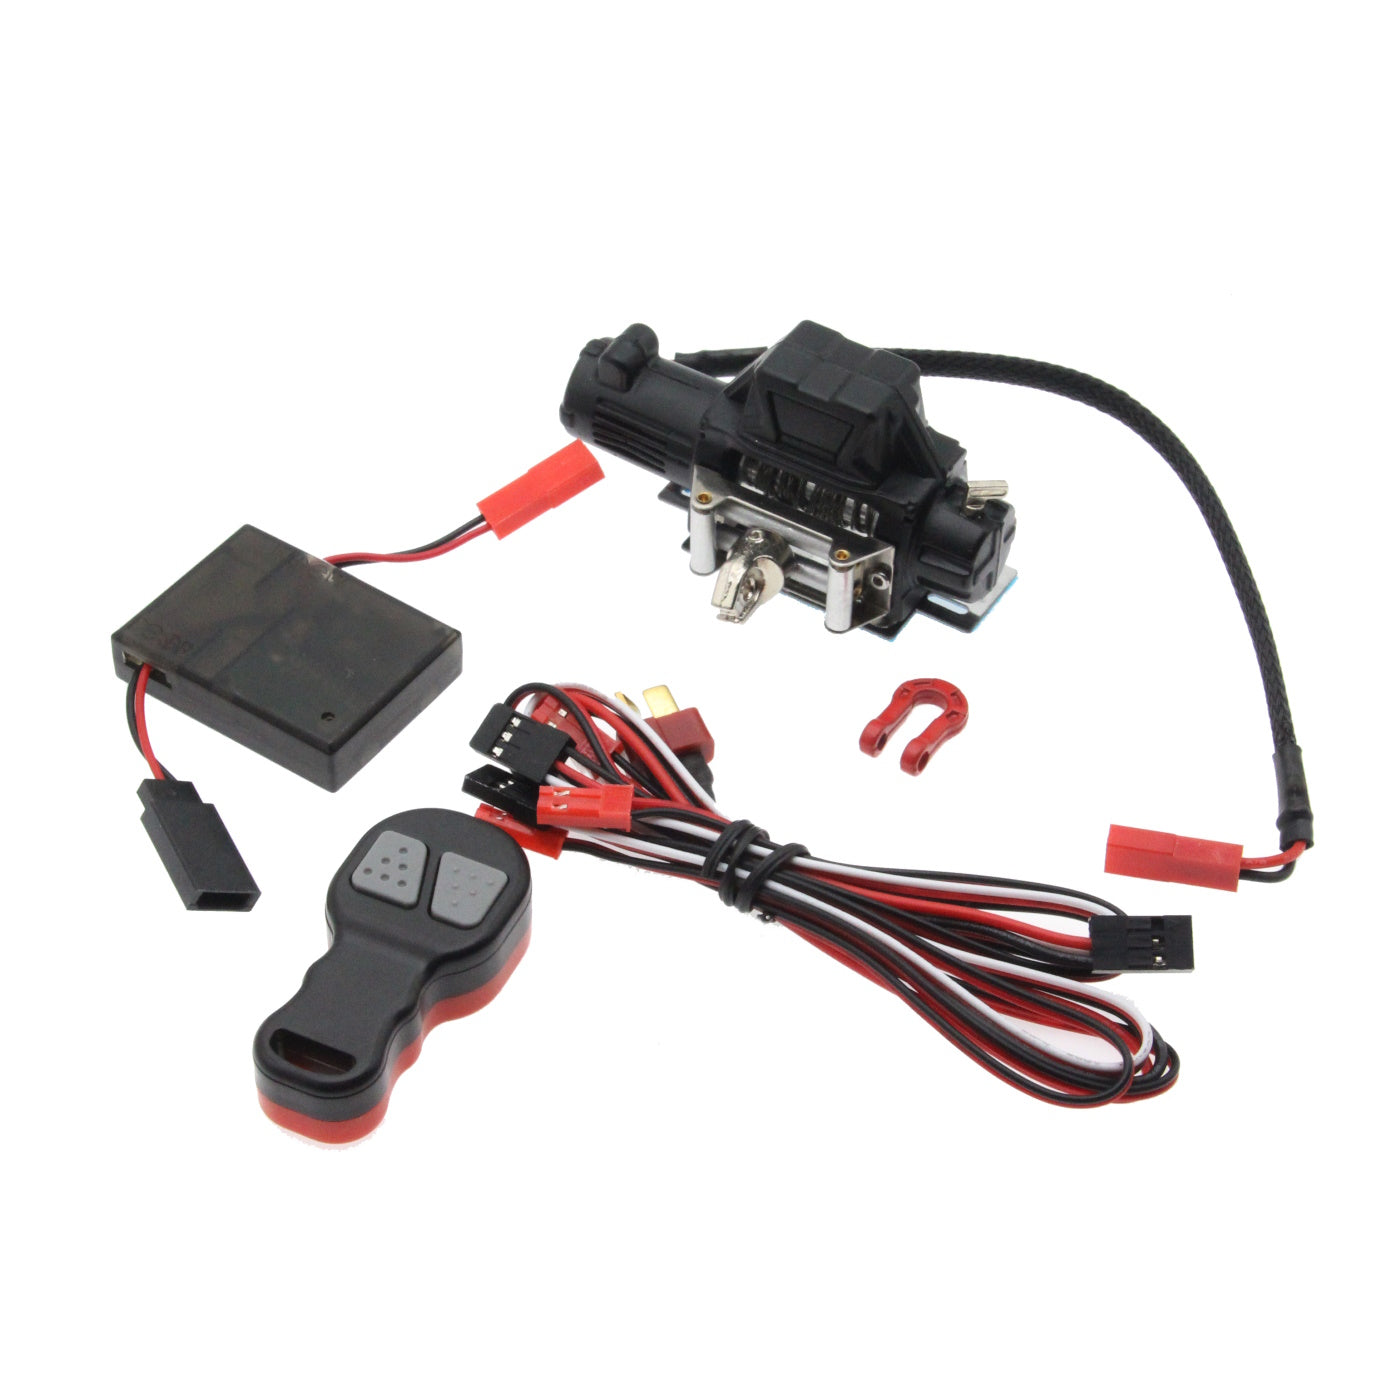 Electric Winch & Remote Controller FOR 1:10 RC TRX4 Axial SCX10 II Redcat.